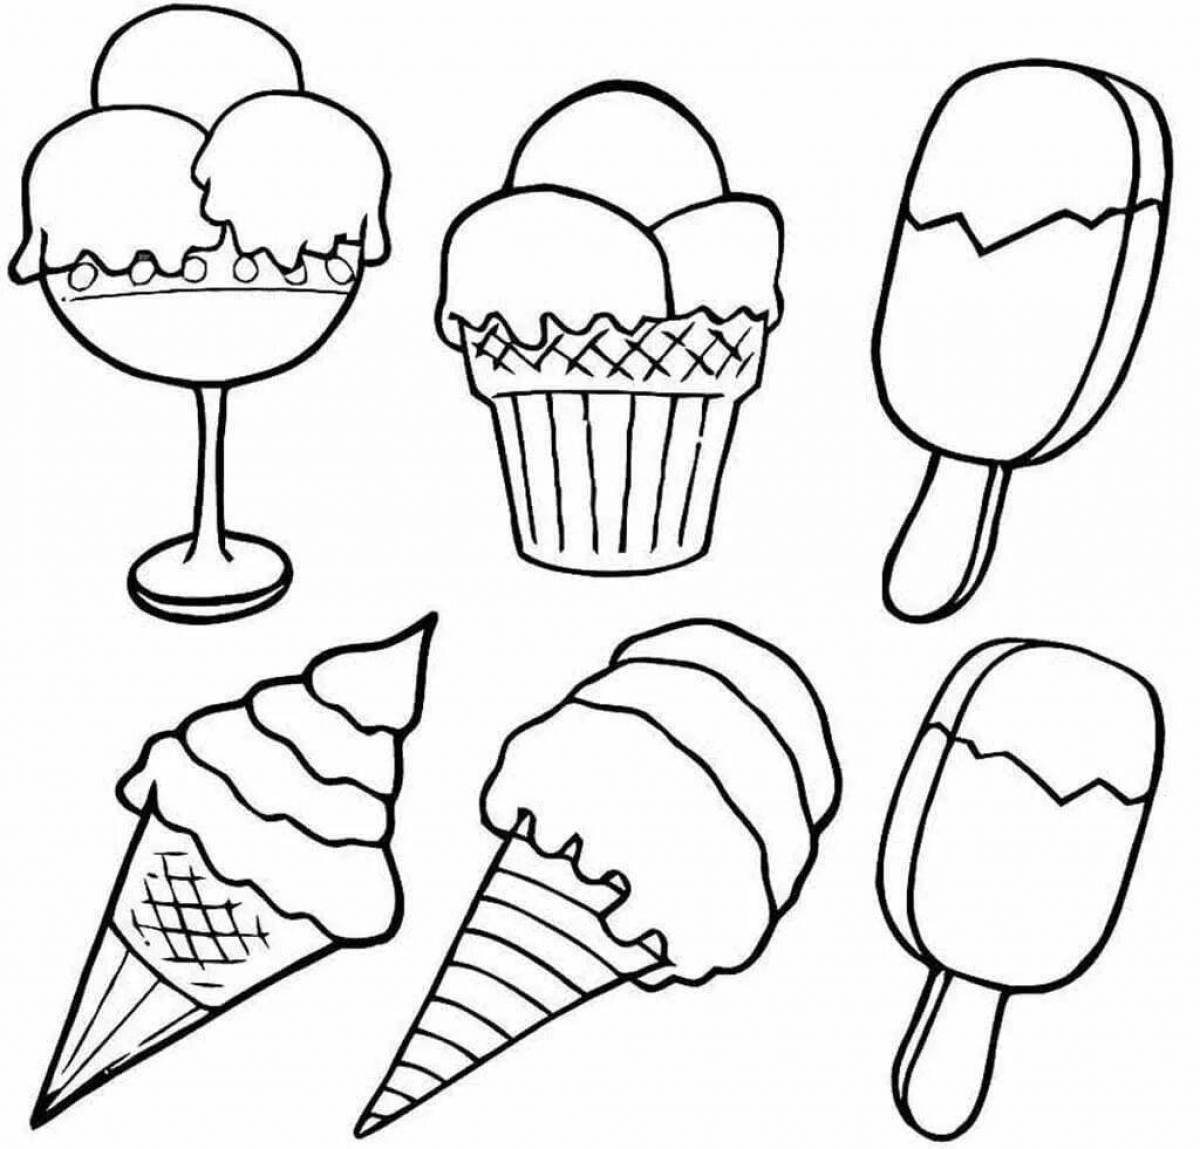 Playful ice cream coloring page for kids